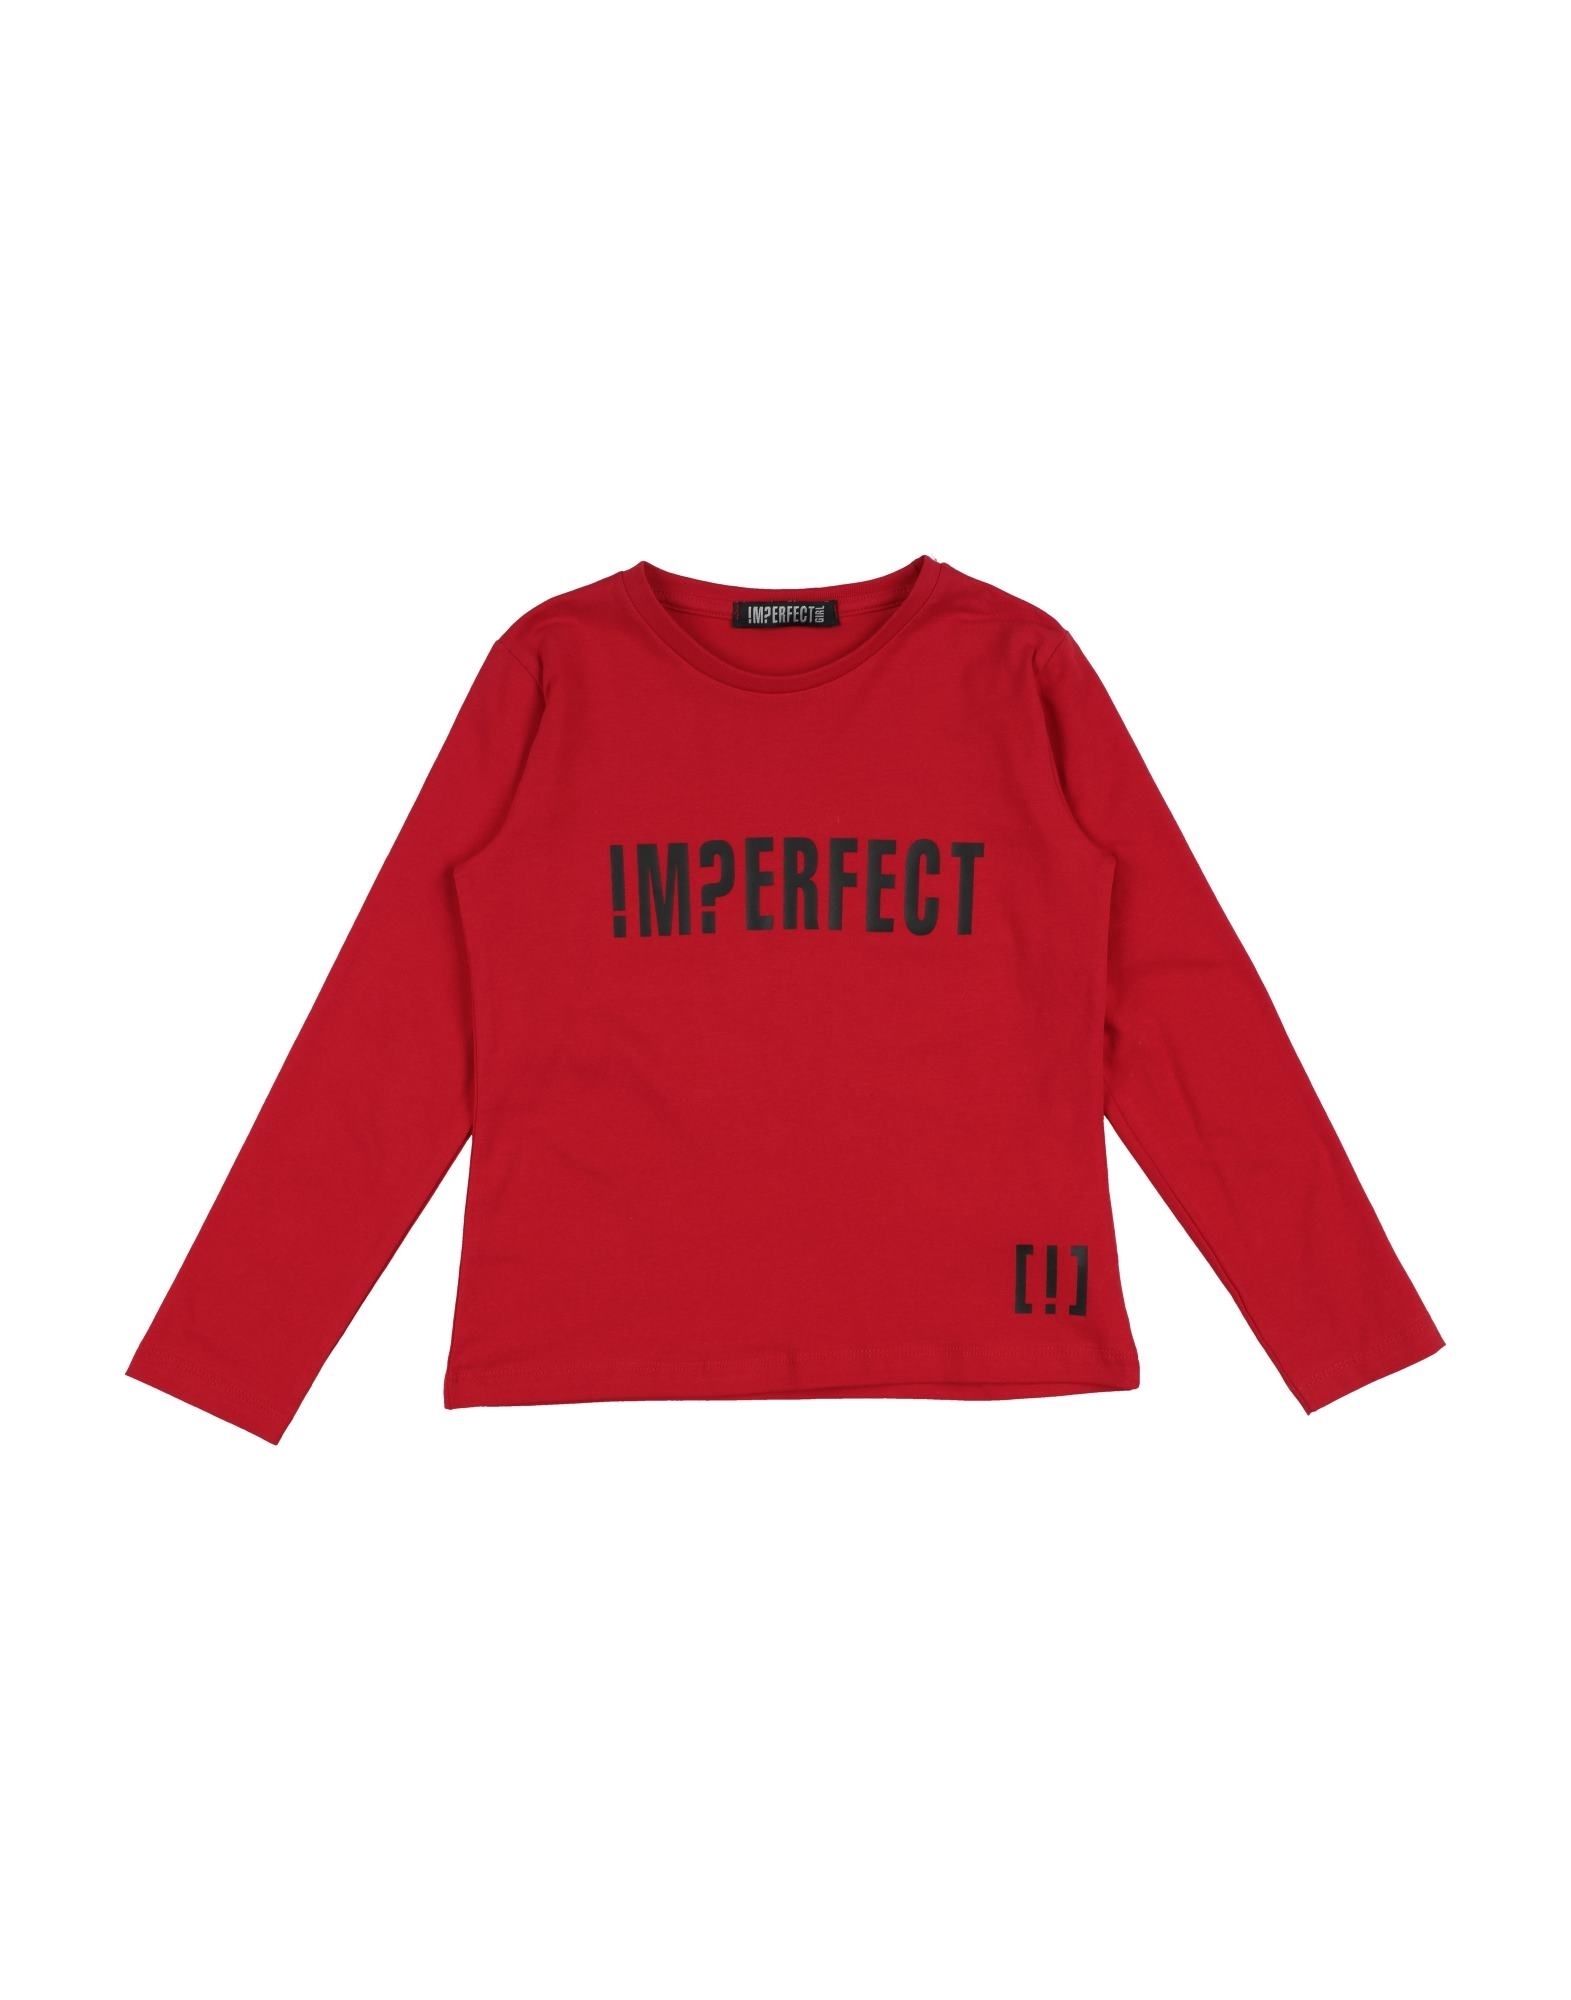 !m?erfect Kids'  T-shirts In Red